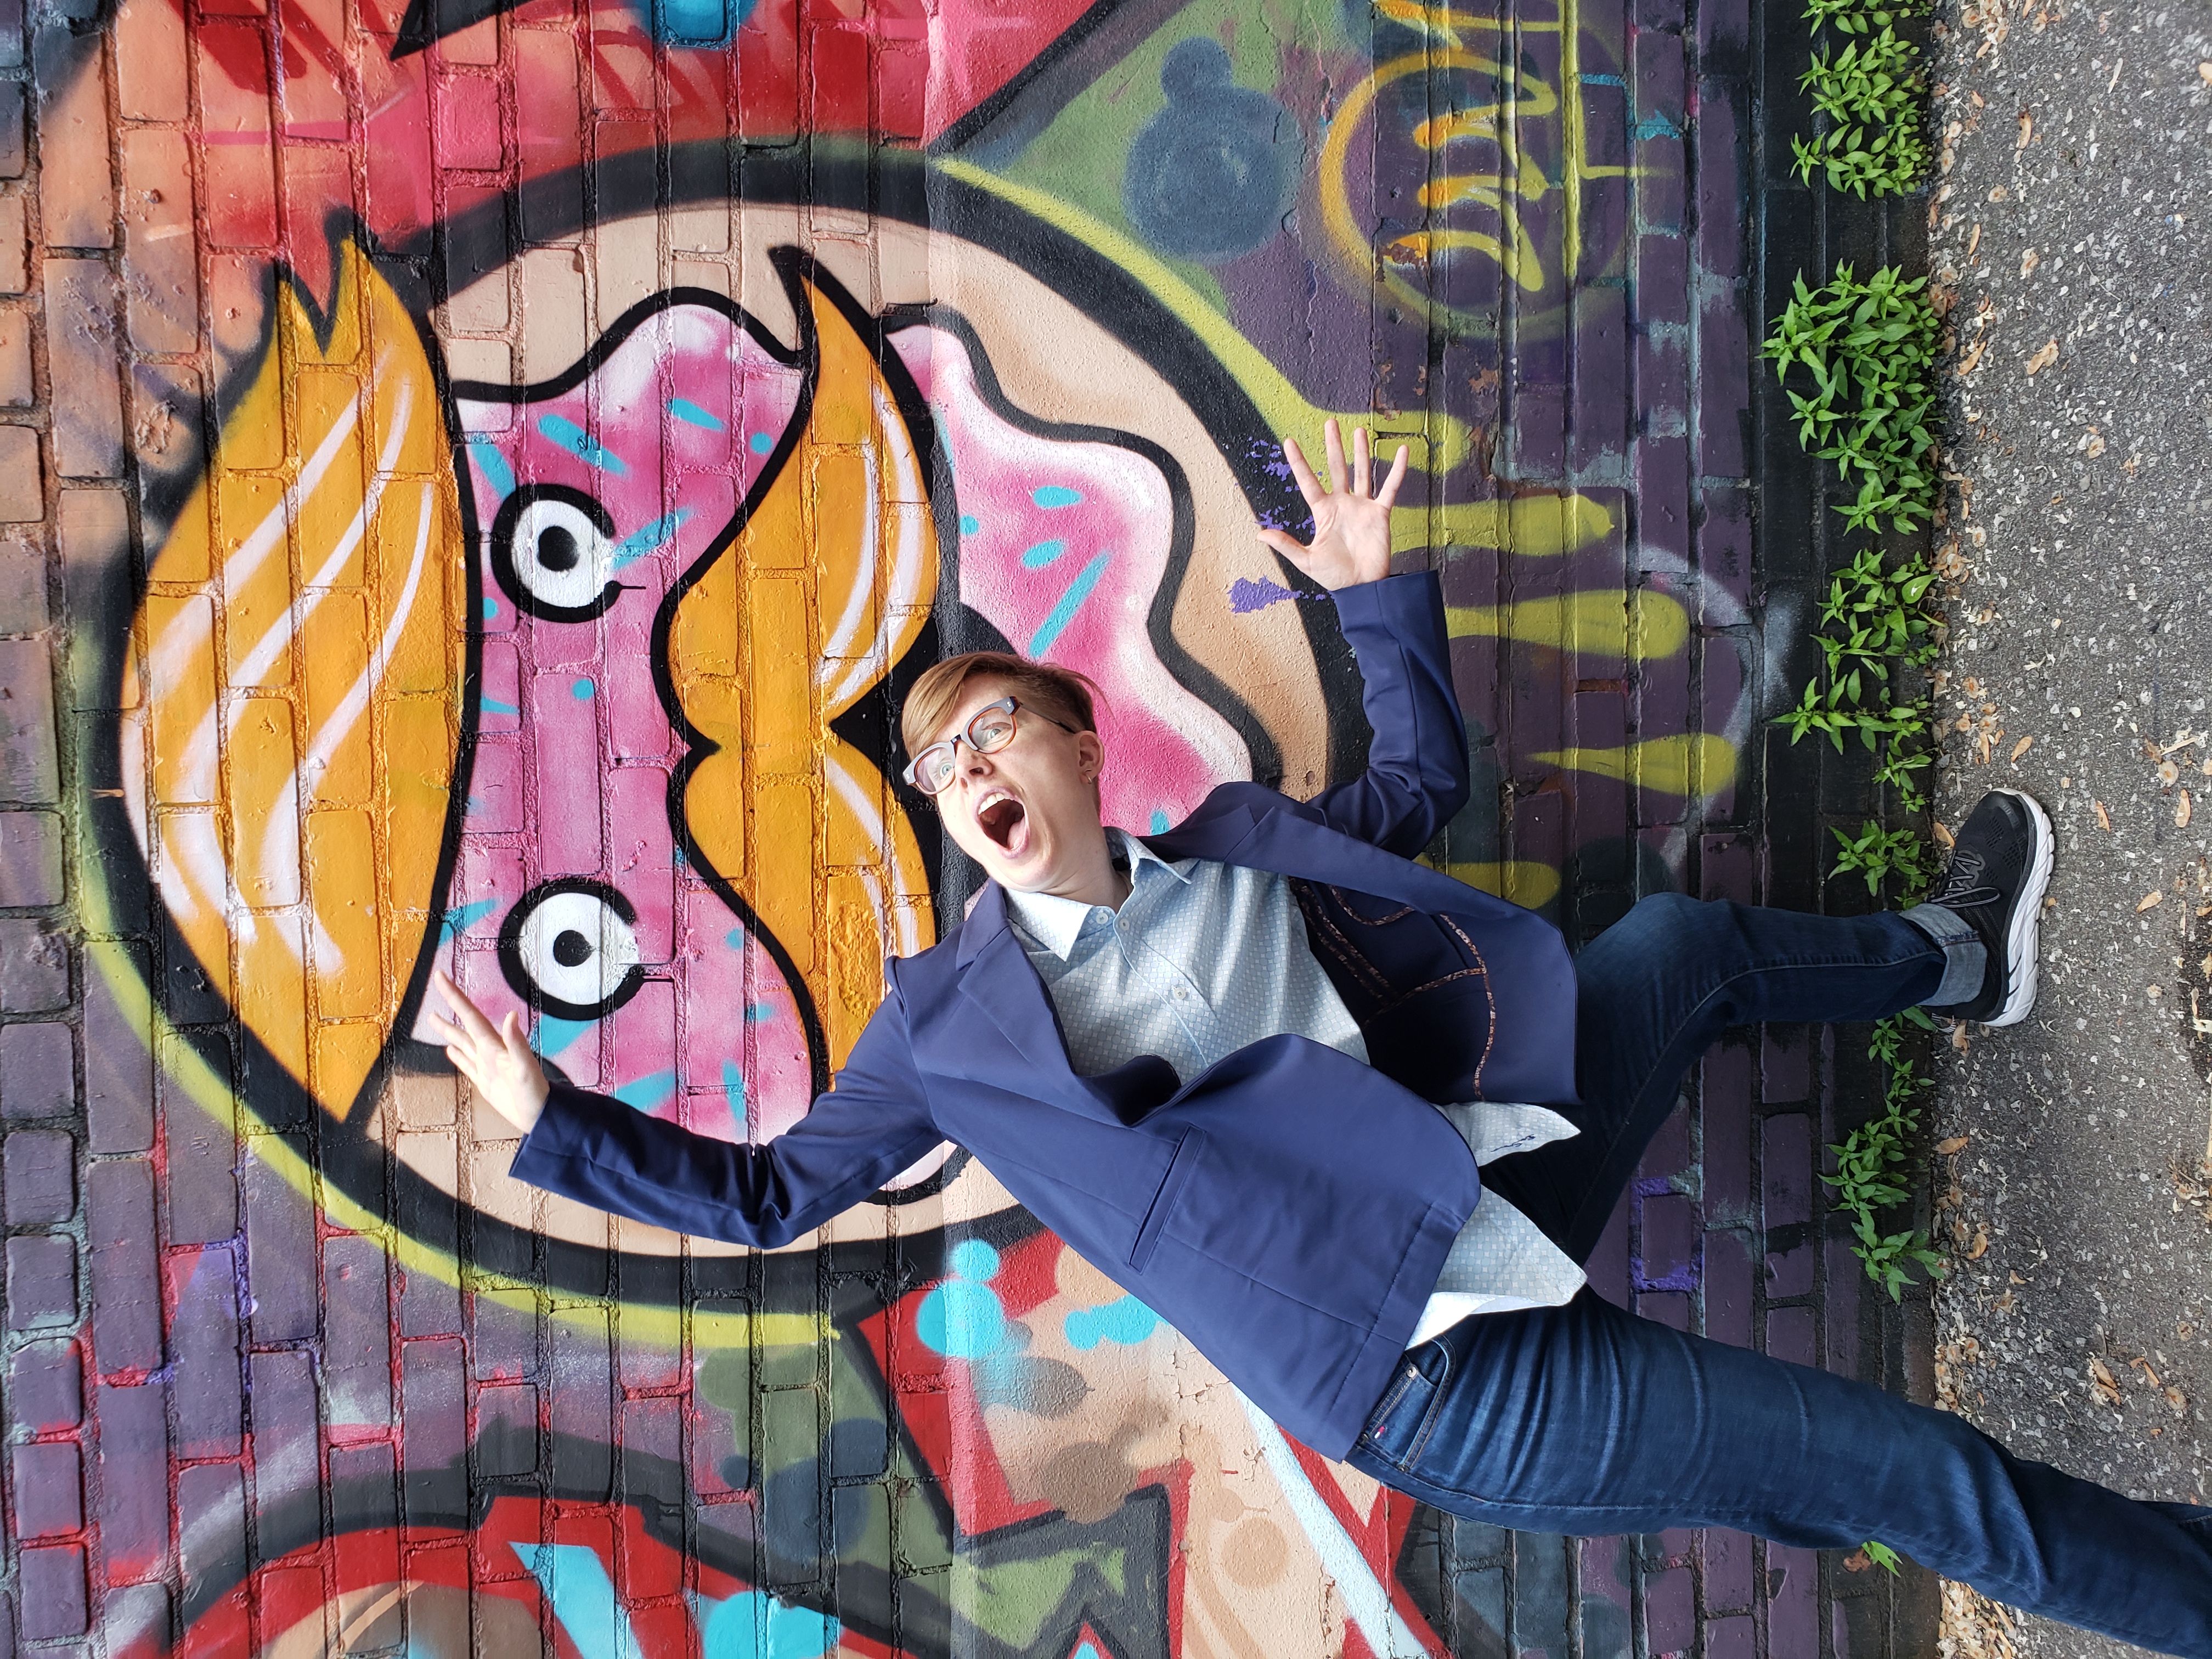 This is an image of Ezra being playful in front of a piece of graffiti. The graffiti looks like a giant donut with a face and Ezra is making a gesture to indicate they might be going to be eaten by the donut.